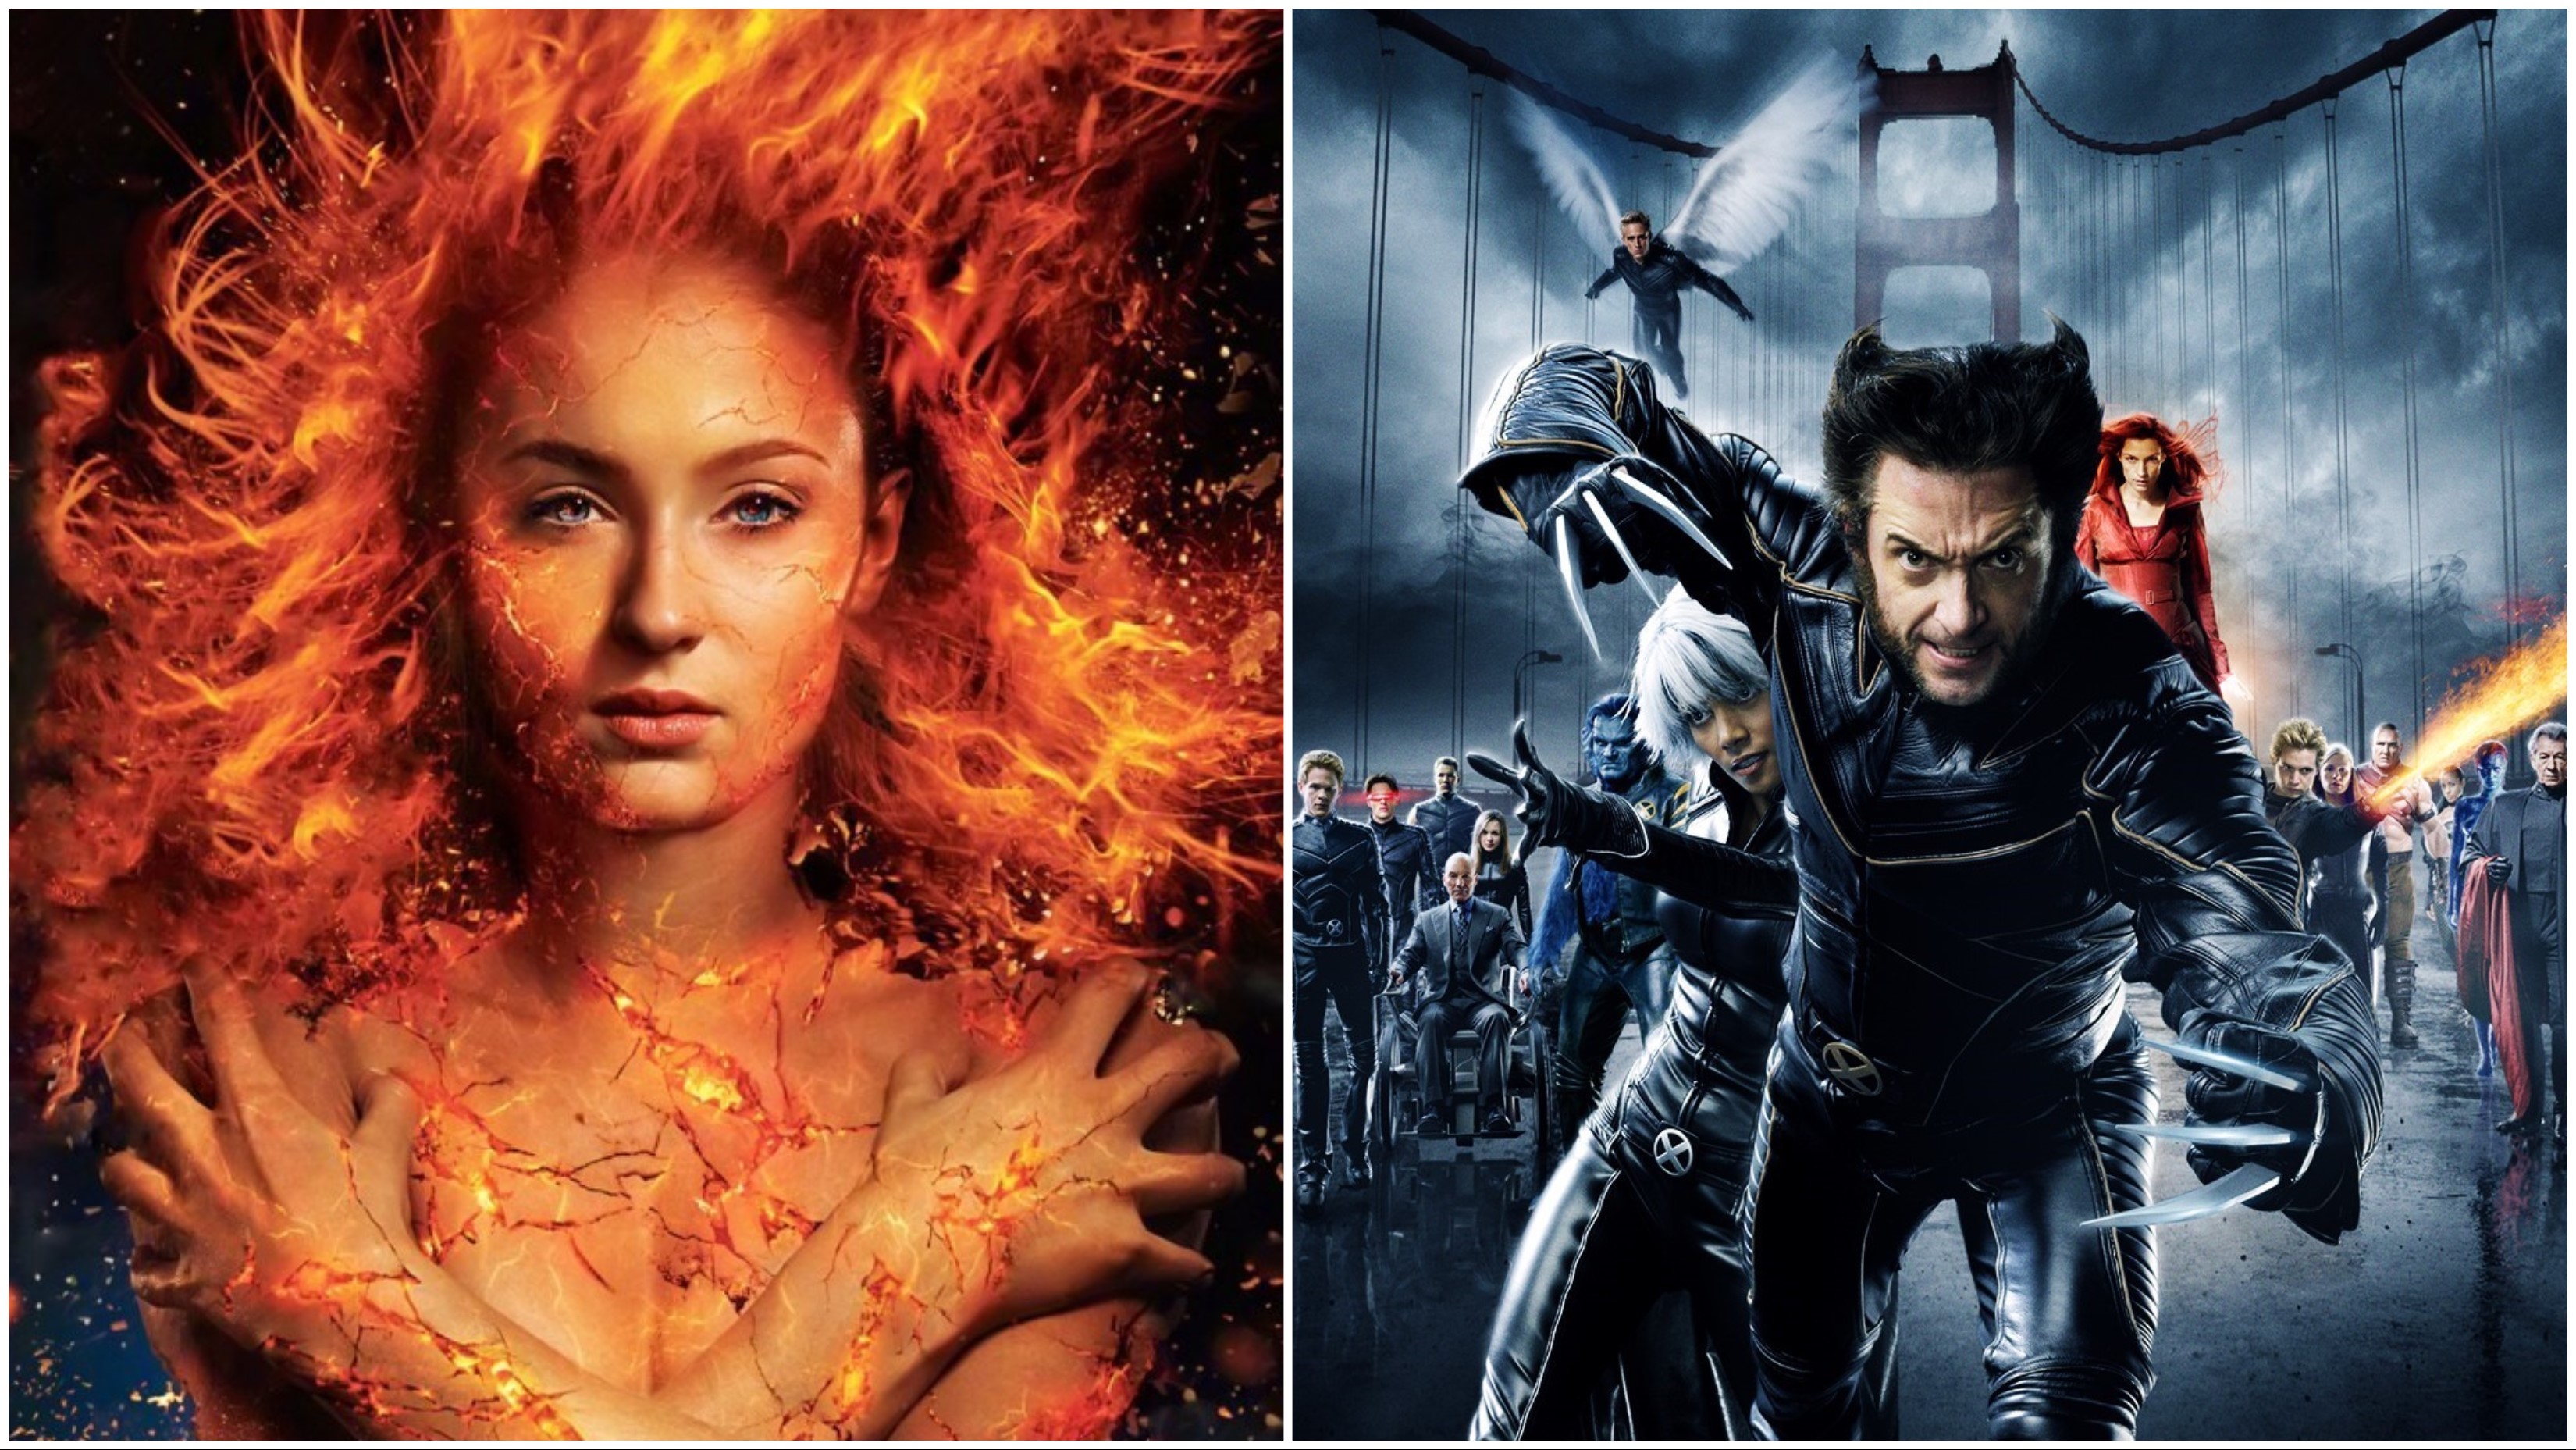 Hutch Parker, a producer on Dark Phoenix, recently spoke about the movie and how it differs from X-Men: The Last Stand despite adapting the same story arc.